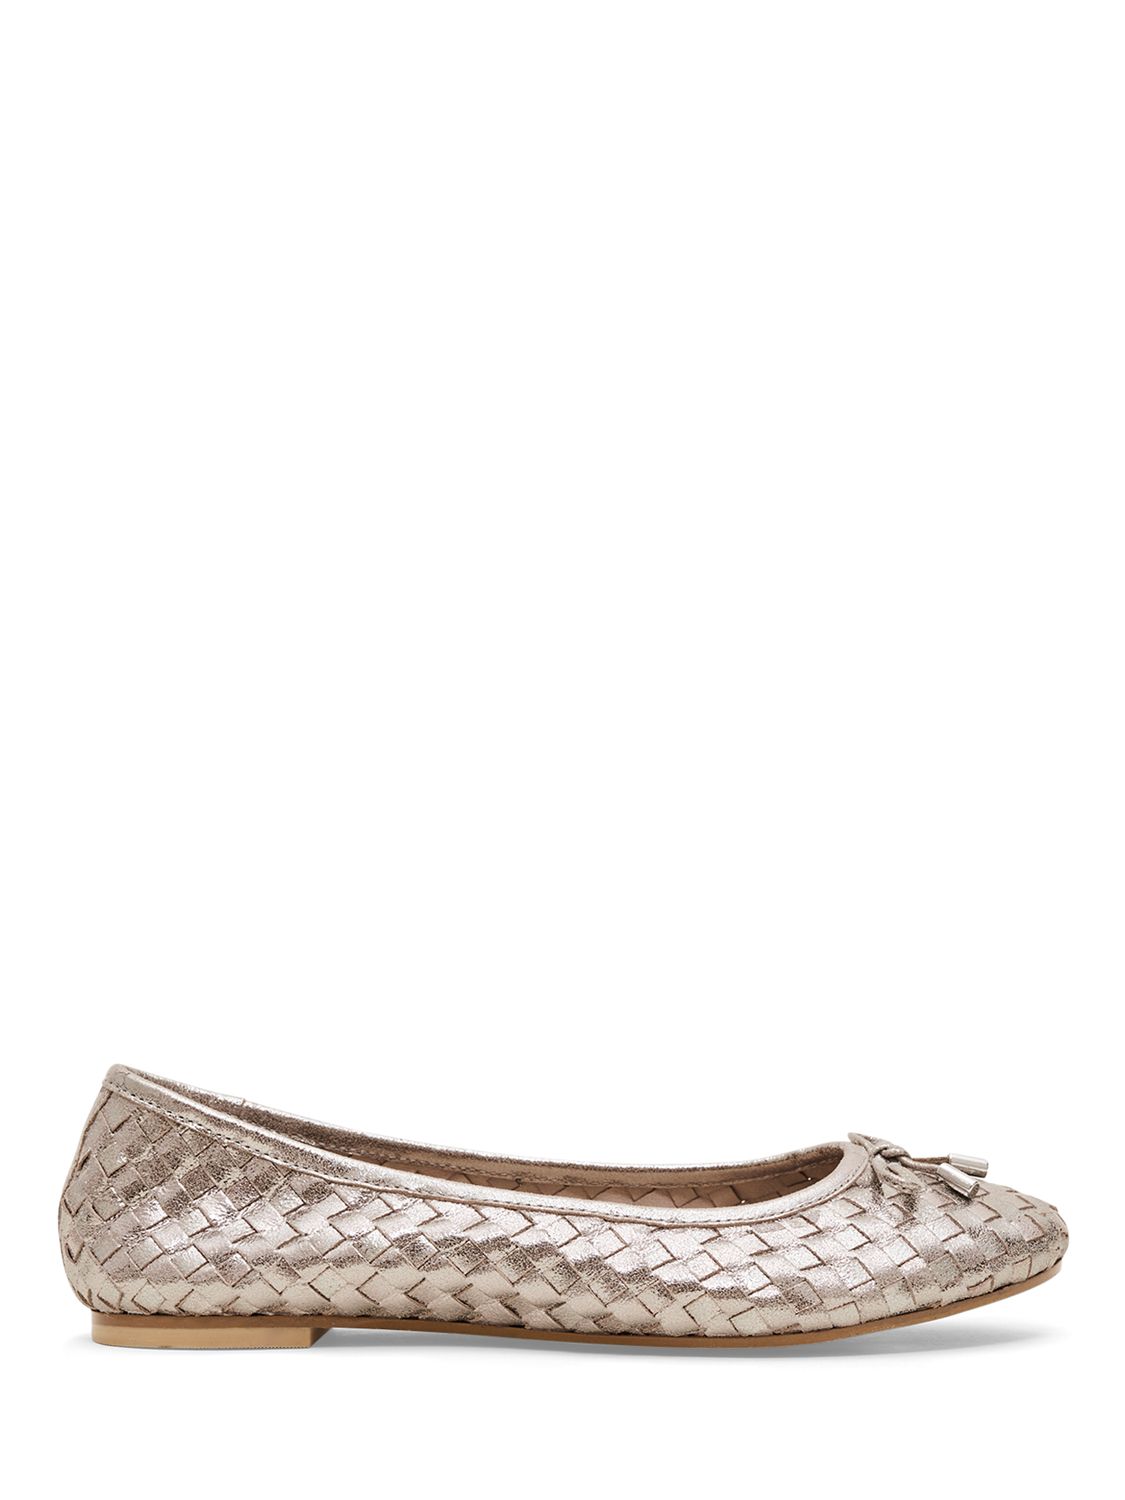 Phase Eight Woven Leather Ballet Pumps, Metallic at John Lewis & Partners